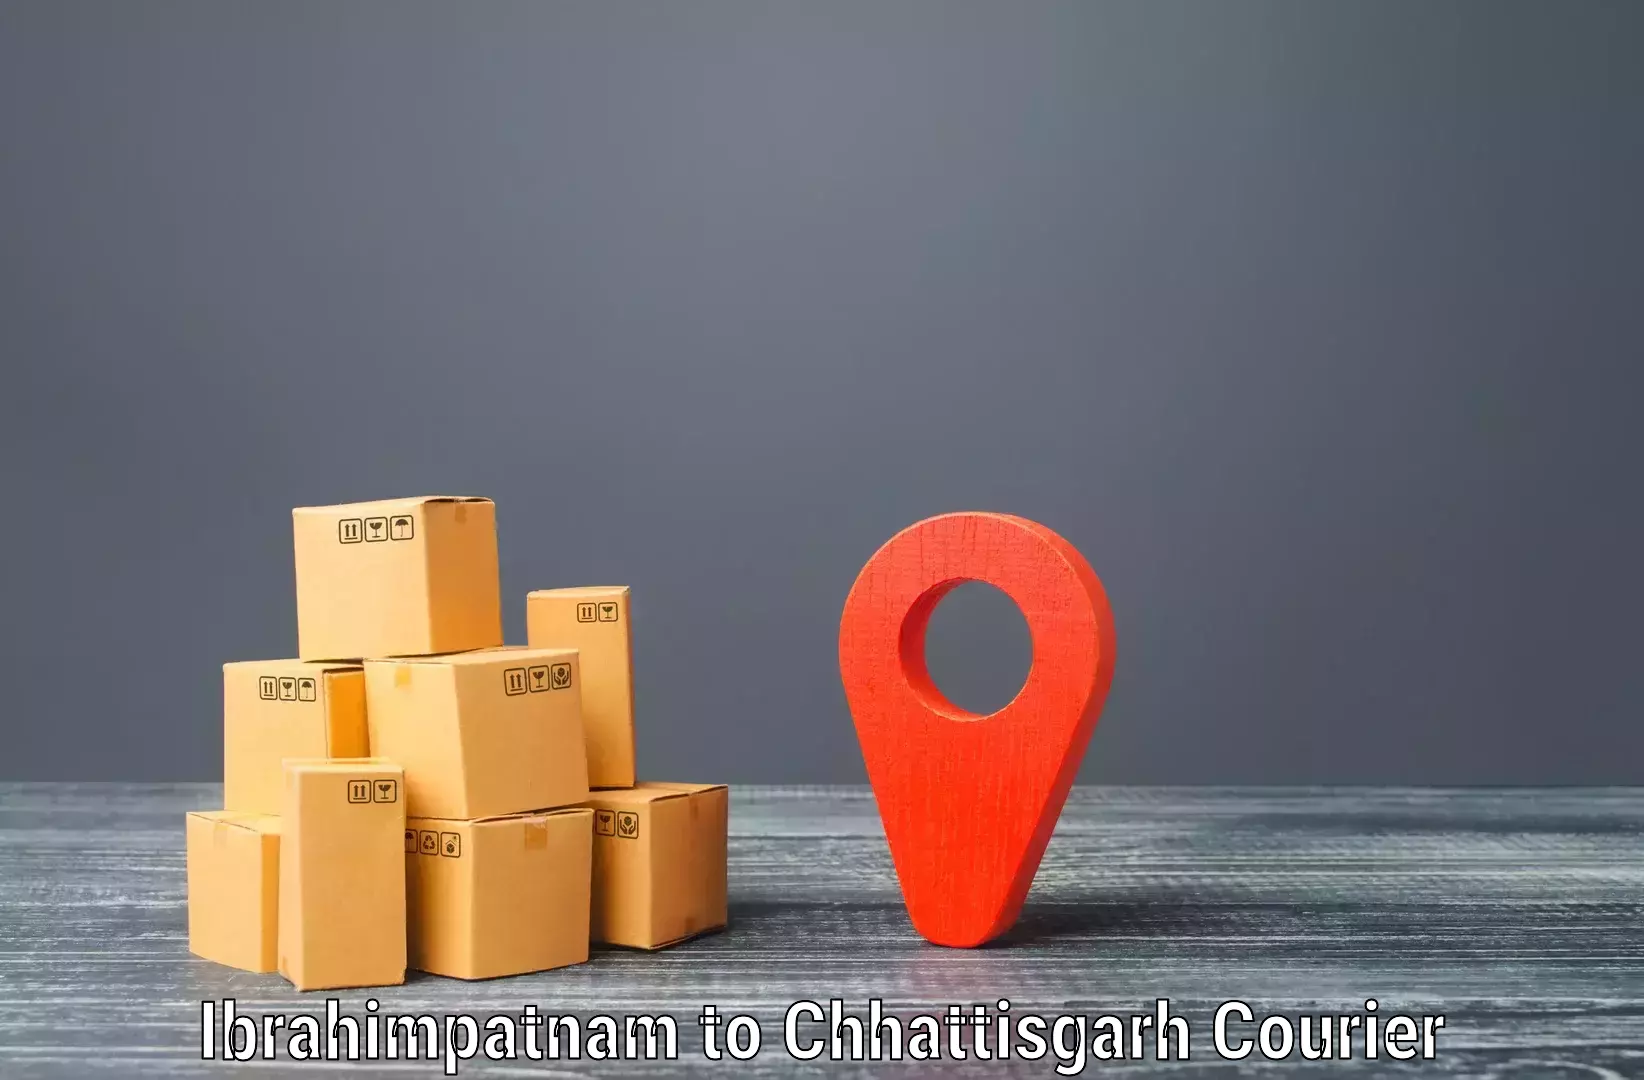 Courier dispatch services in Ibrahimpatnam to Raigarh